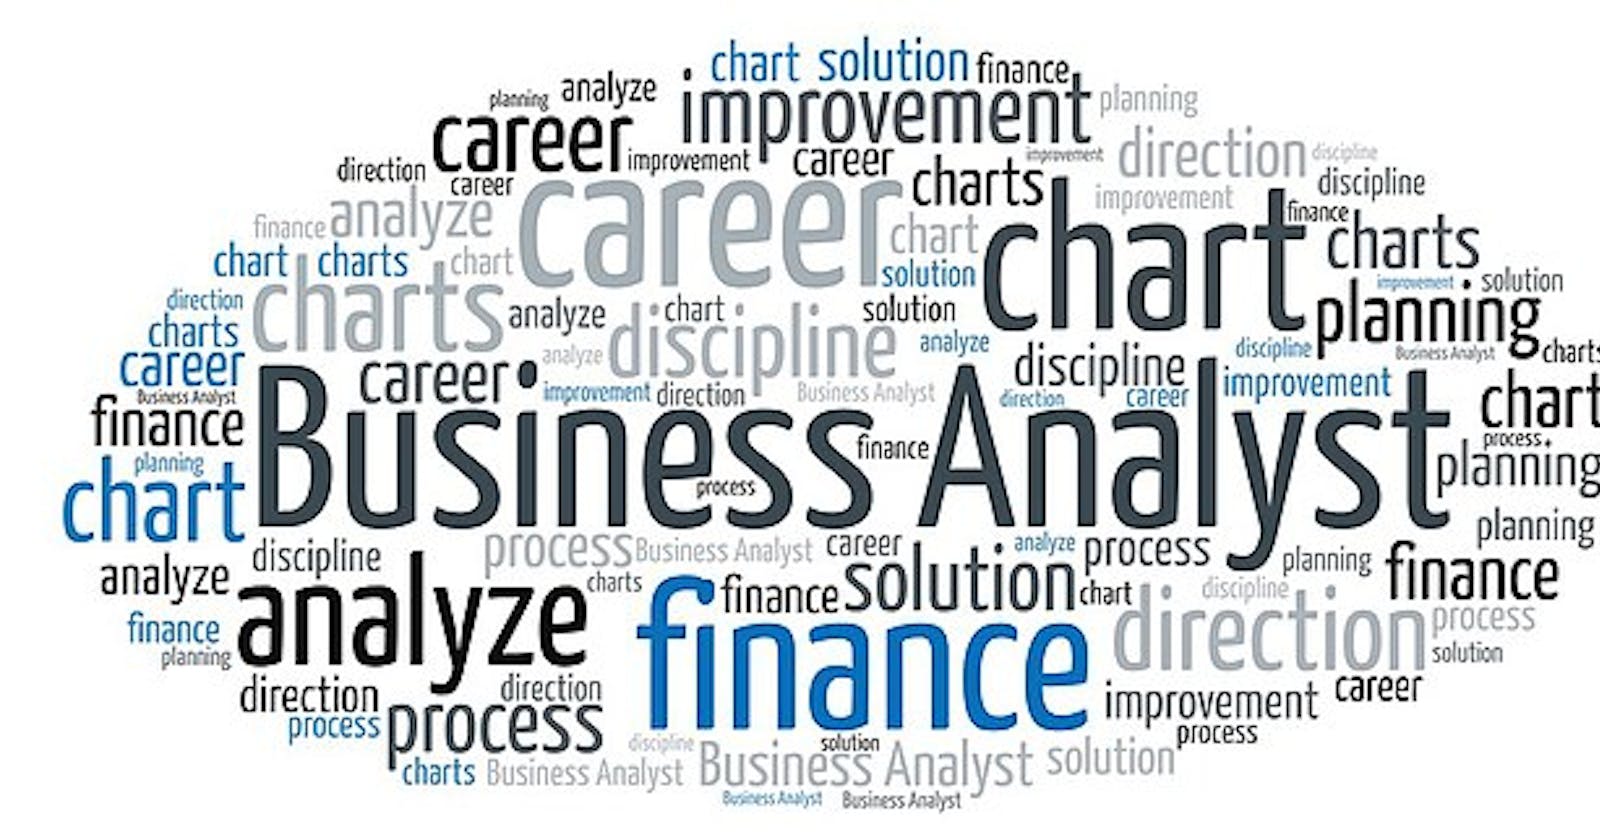 Top 5 Career Paths for Business Analysts in 2023